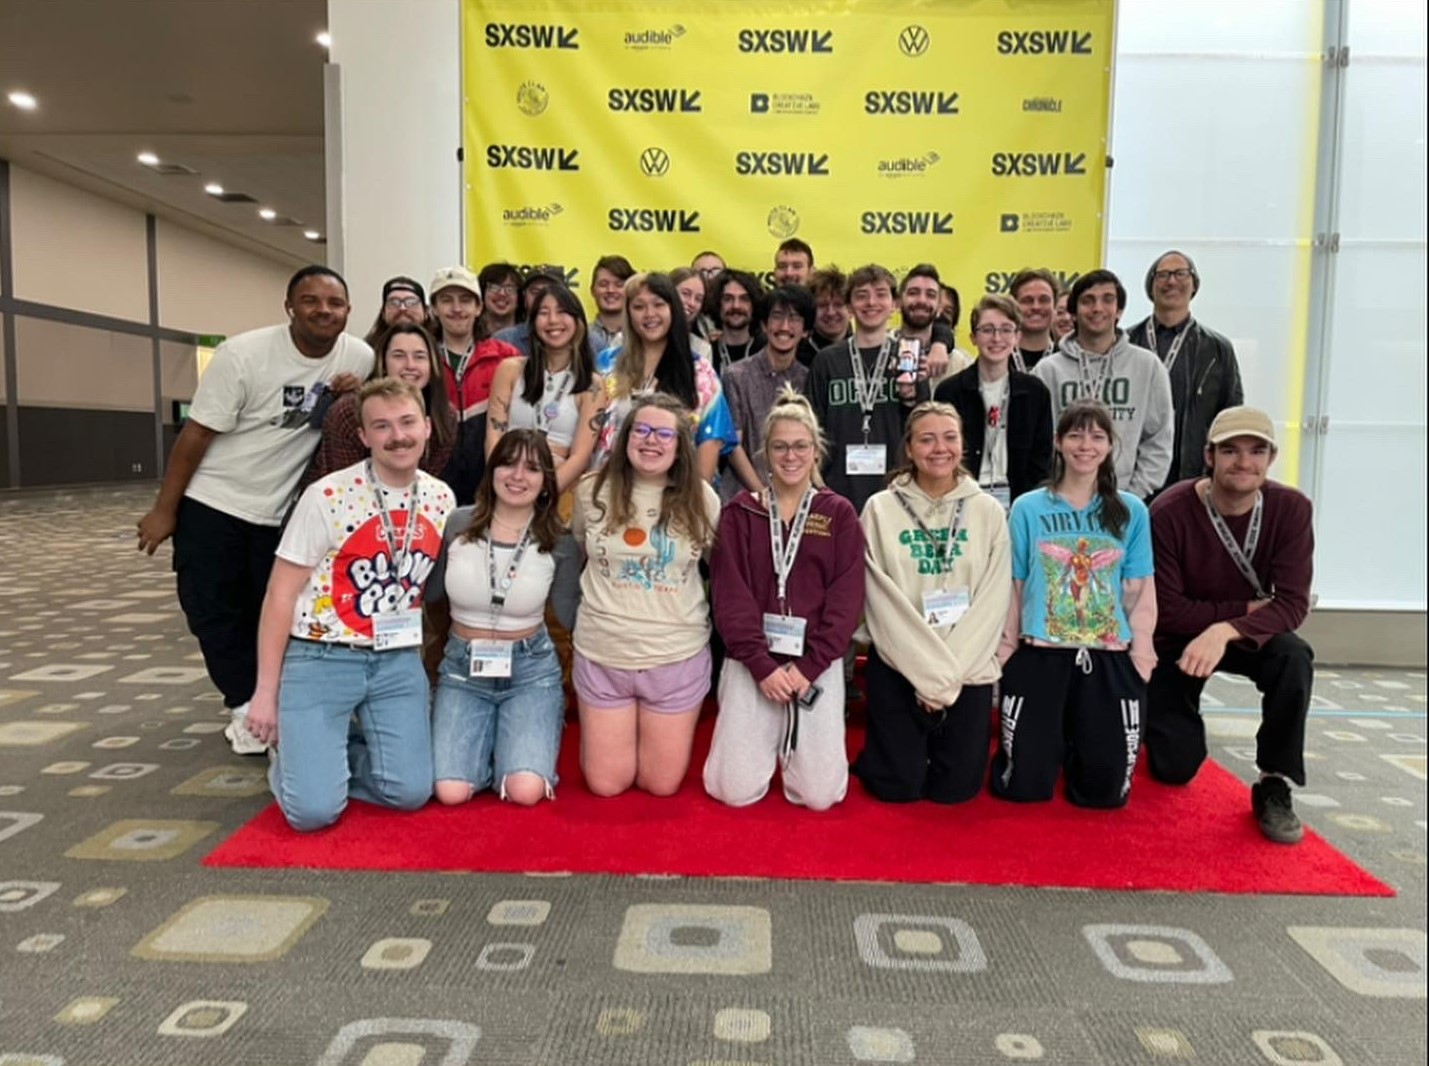 OHIO students pose for group photo at SXSW